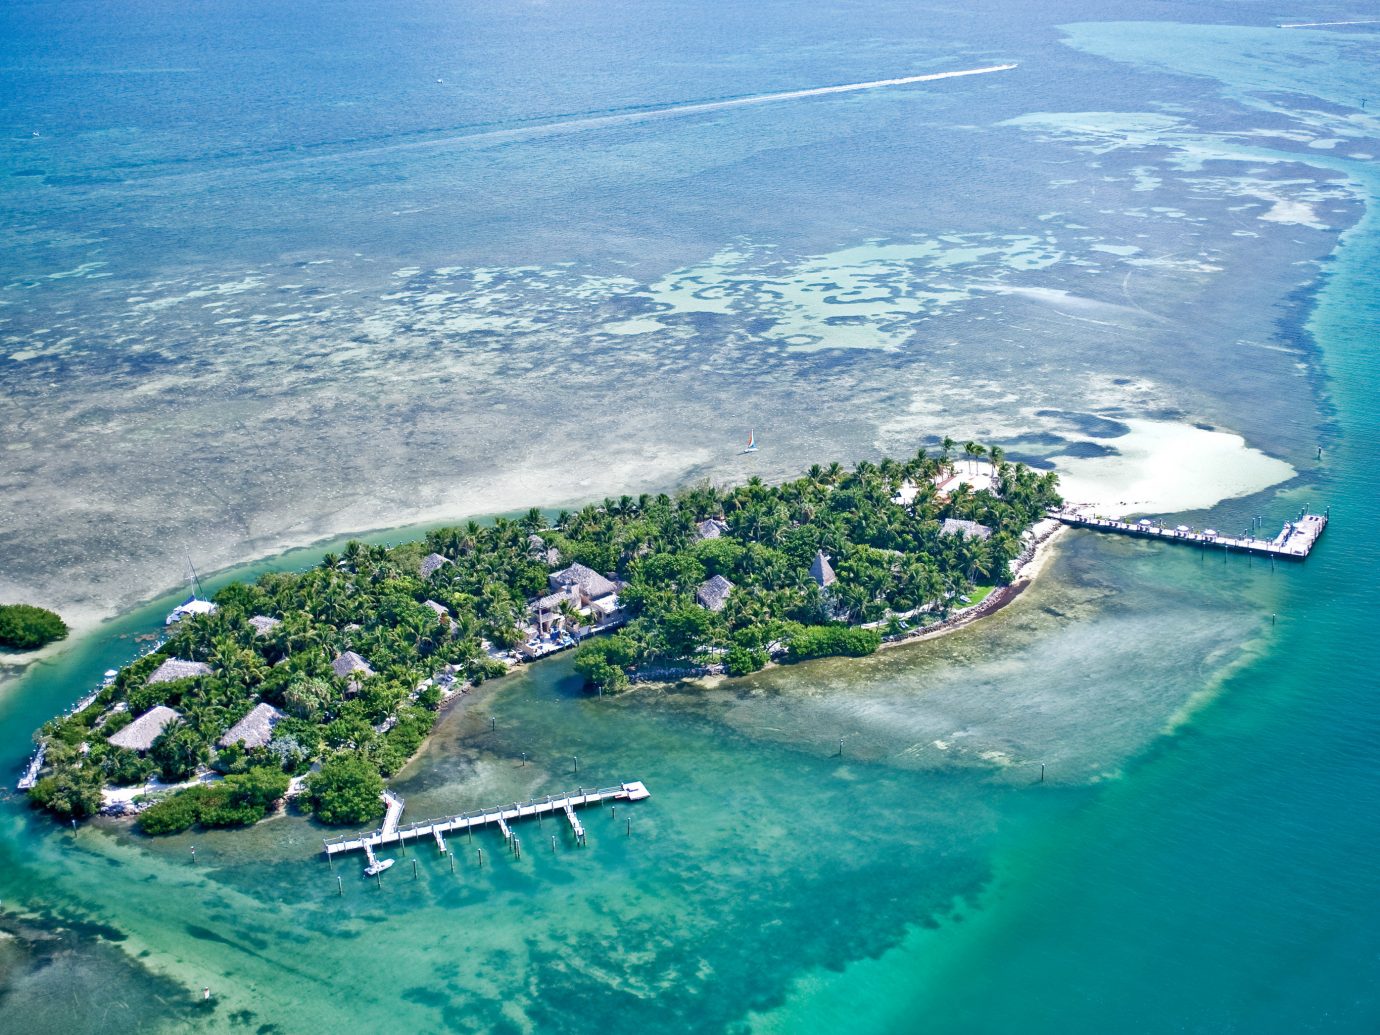 Beach Beachfront Hotels Island Outdoors Resort Romance Romantic Waterfront water water sport aerial photography outdoor archipelago geographical feature landform Sea Coast mountain caribbean Nature Ocean islet Sport reef atoll atmosphere of earth cape bay artificial island surfing bird's eye view vehicle wave terrain Lagoon